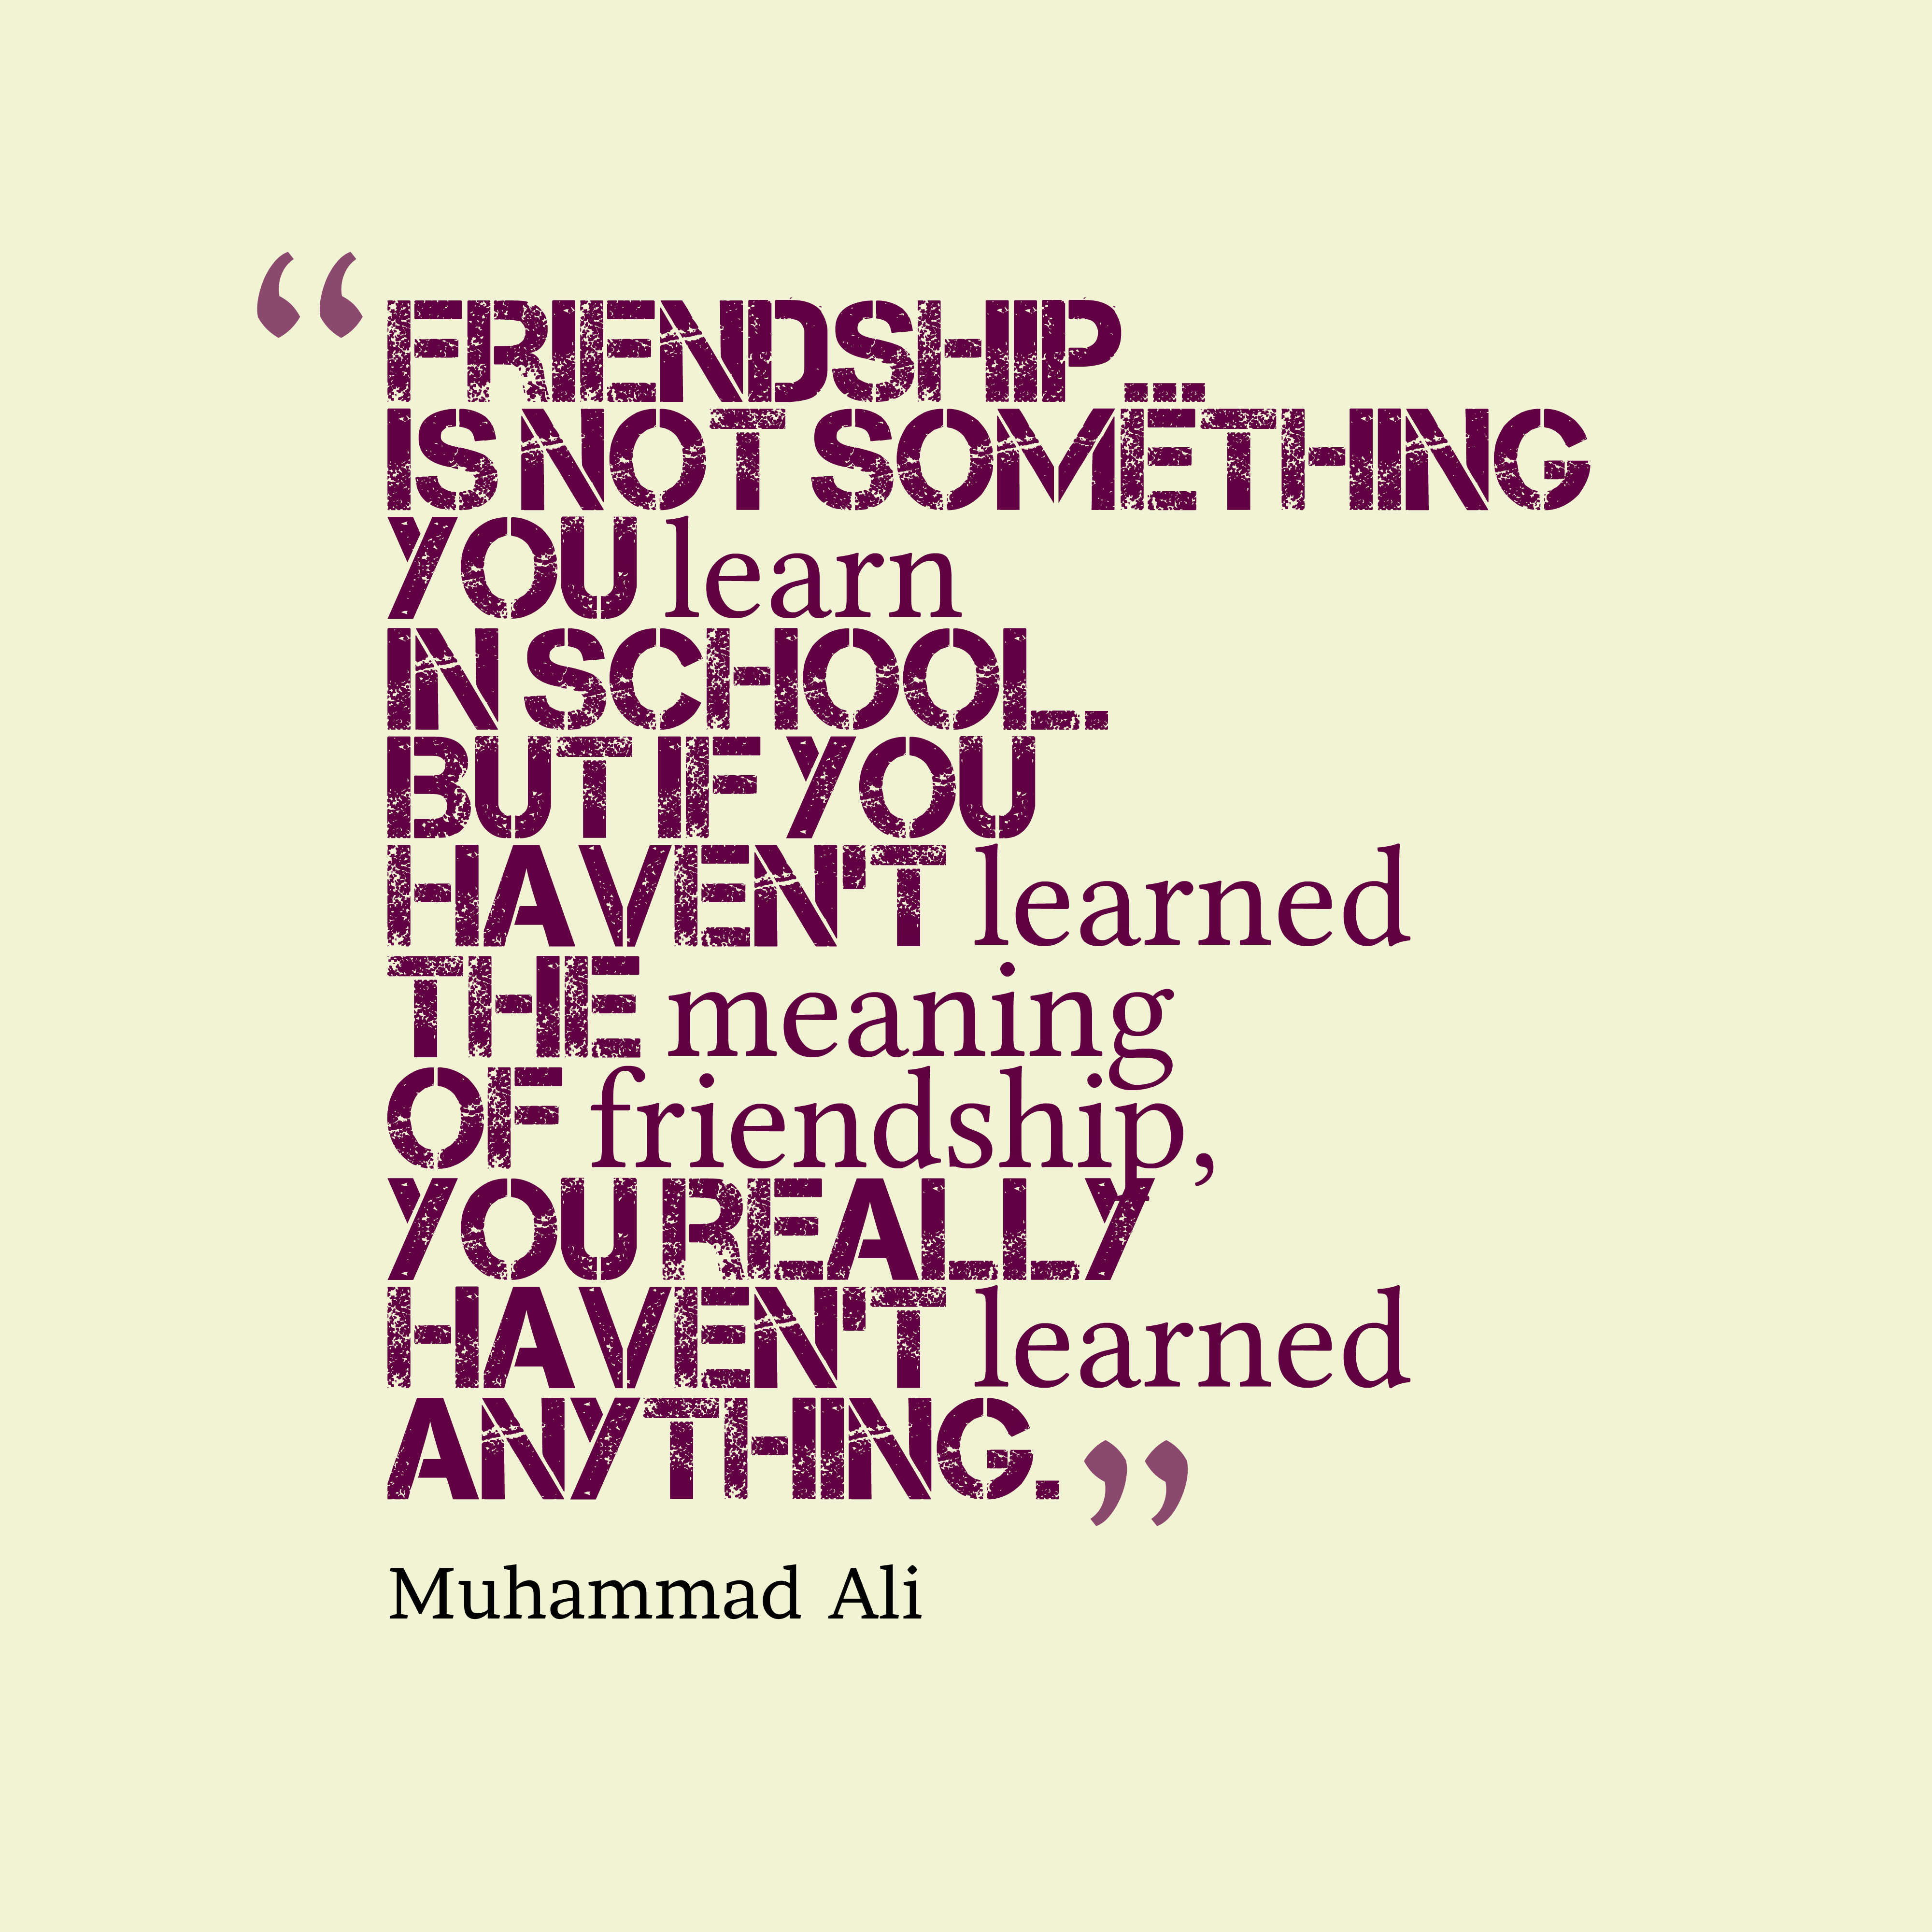 10 Beautiful Friendship Quotes for You
